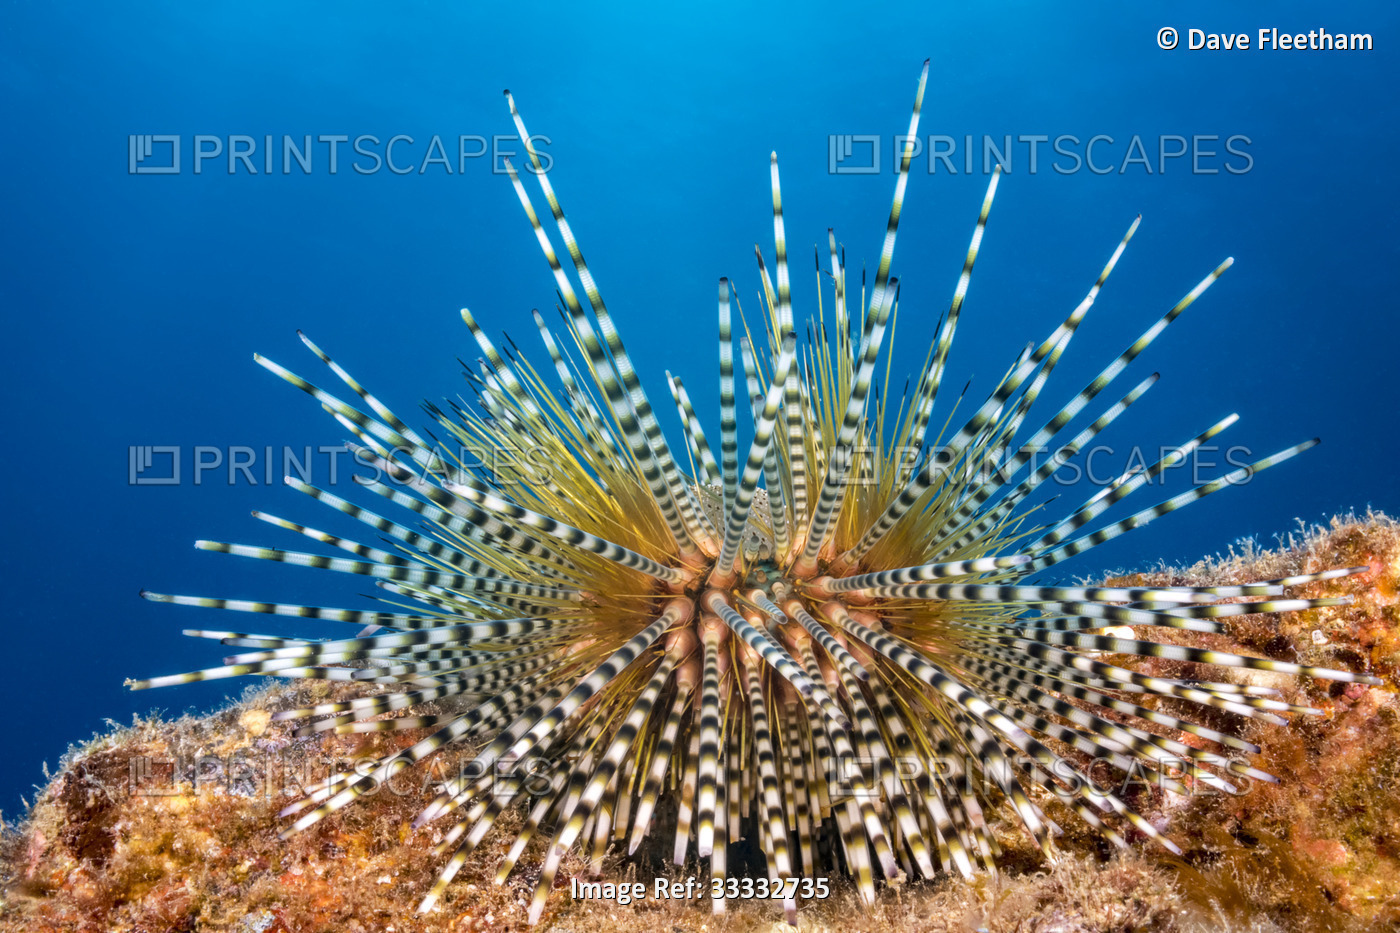 This is a young banded sea urchin (Echinothrix calamaris), still has its ...